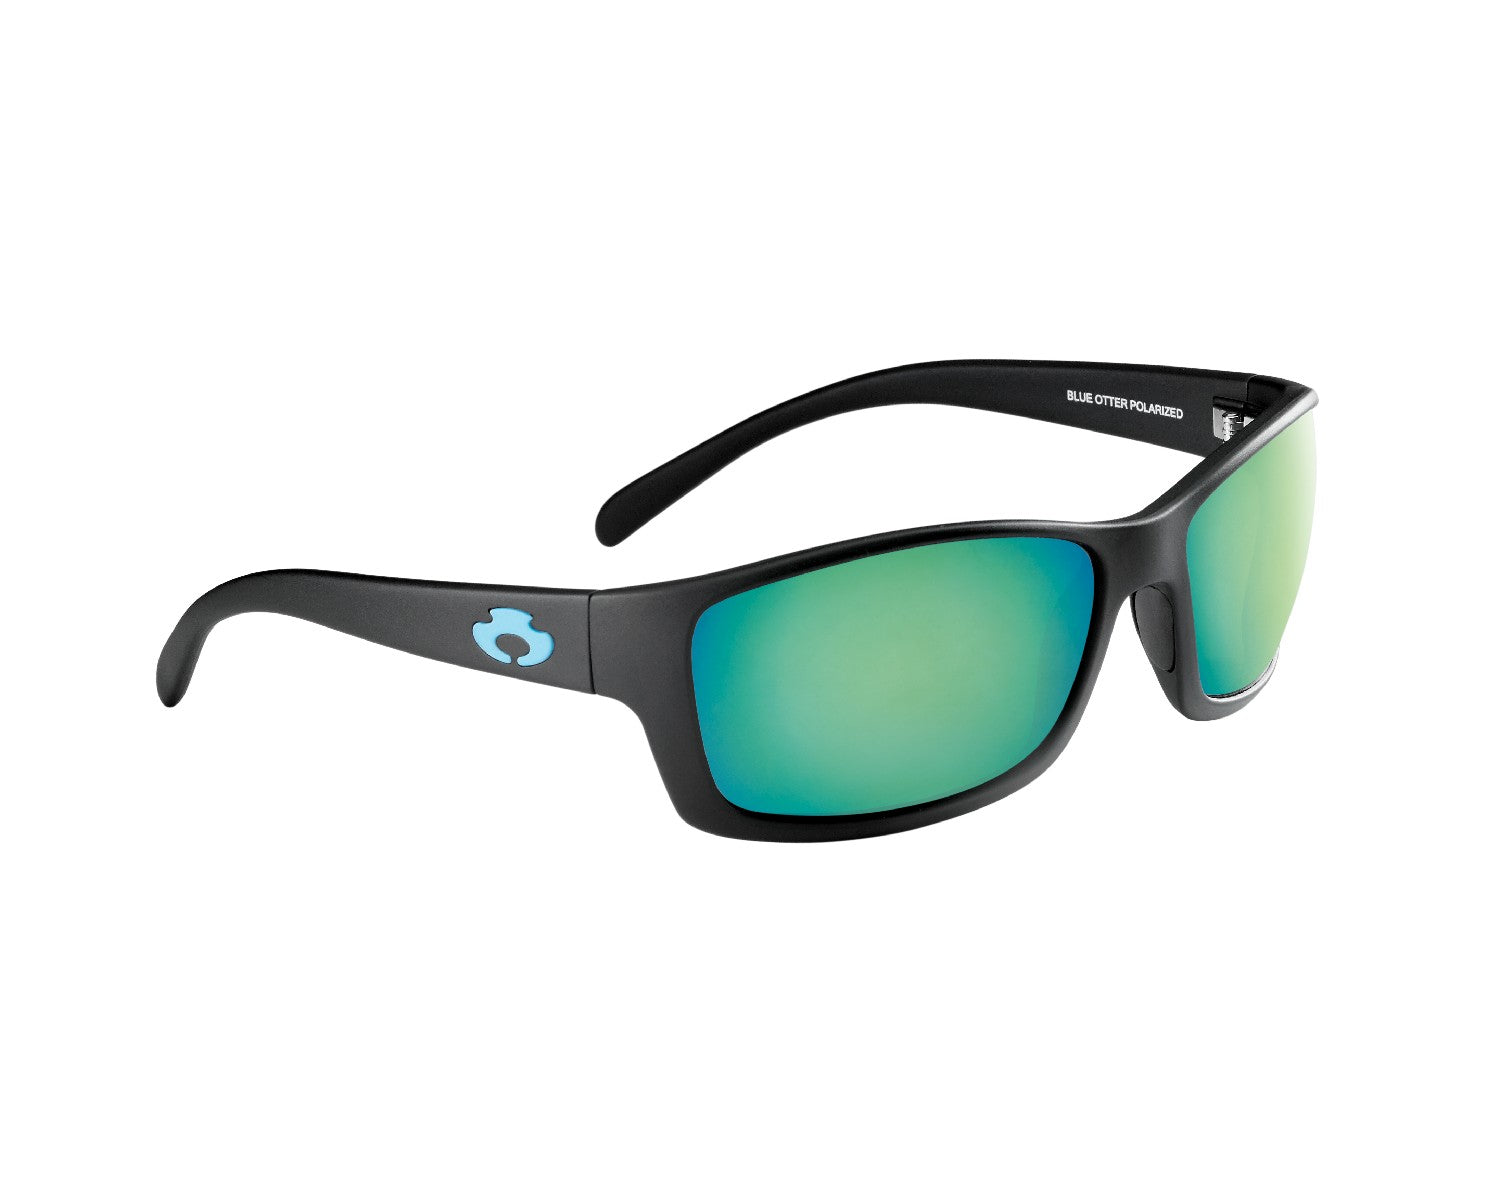 The best polarized shades under the sun are Blue Otter Polarized Sunglasses.  Made for all-day comfort for all day use. Erase glare and ea